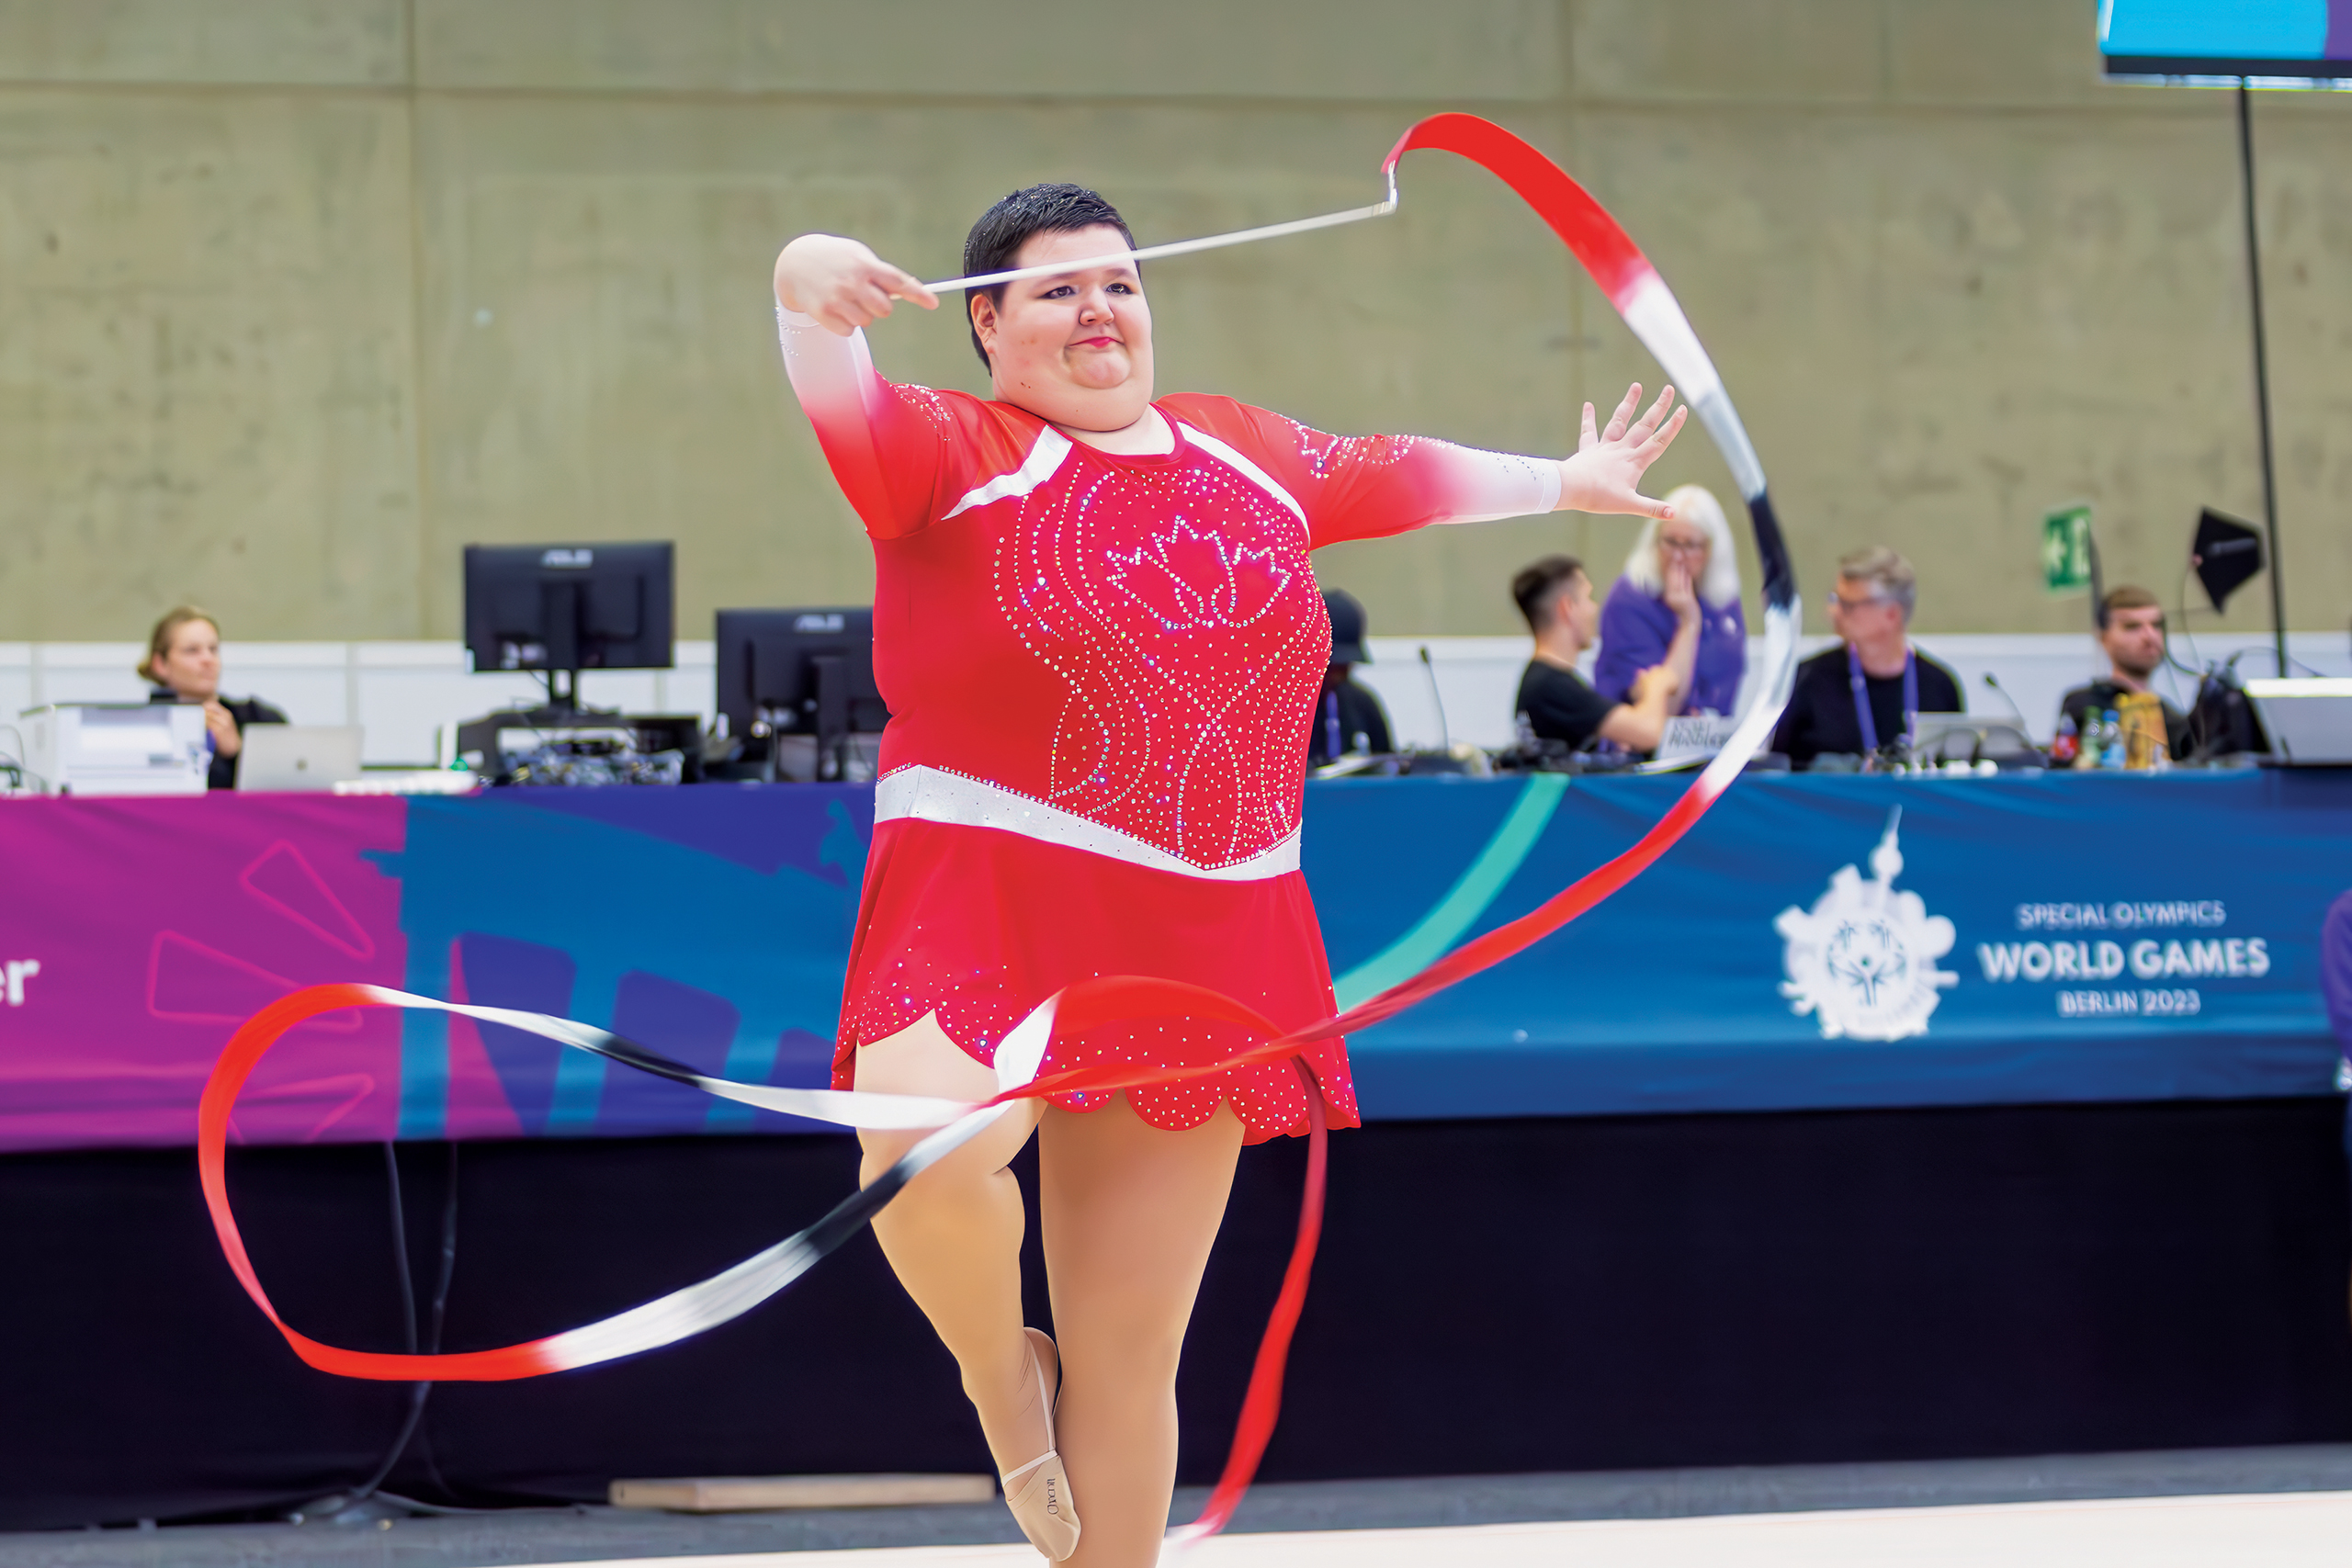 Special Olympics Team Canada athlete, Patricia Colgan during Rhythmic Gymnastics competition at the 2023 Special Olympics World Games in Berlin, Germany.